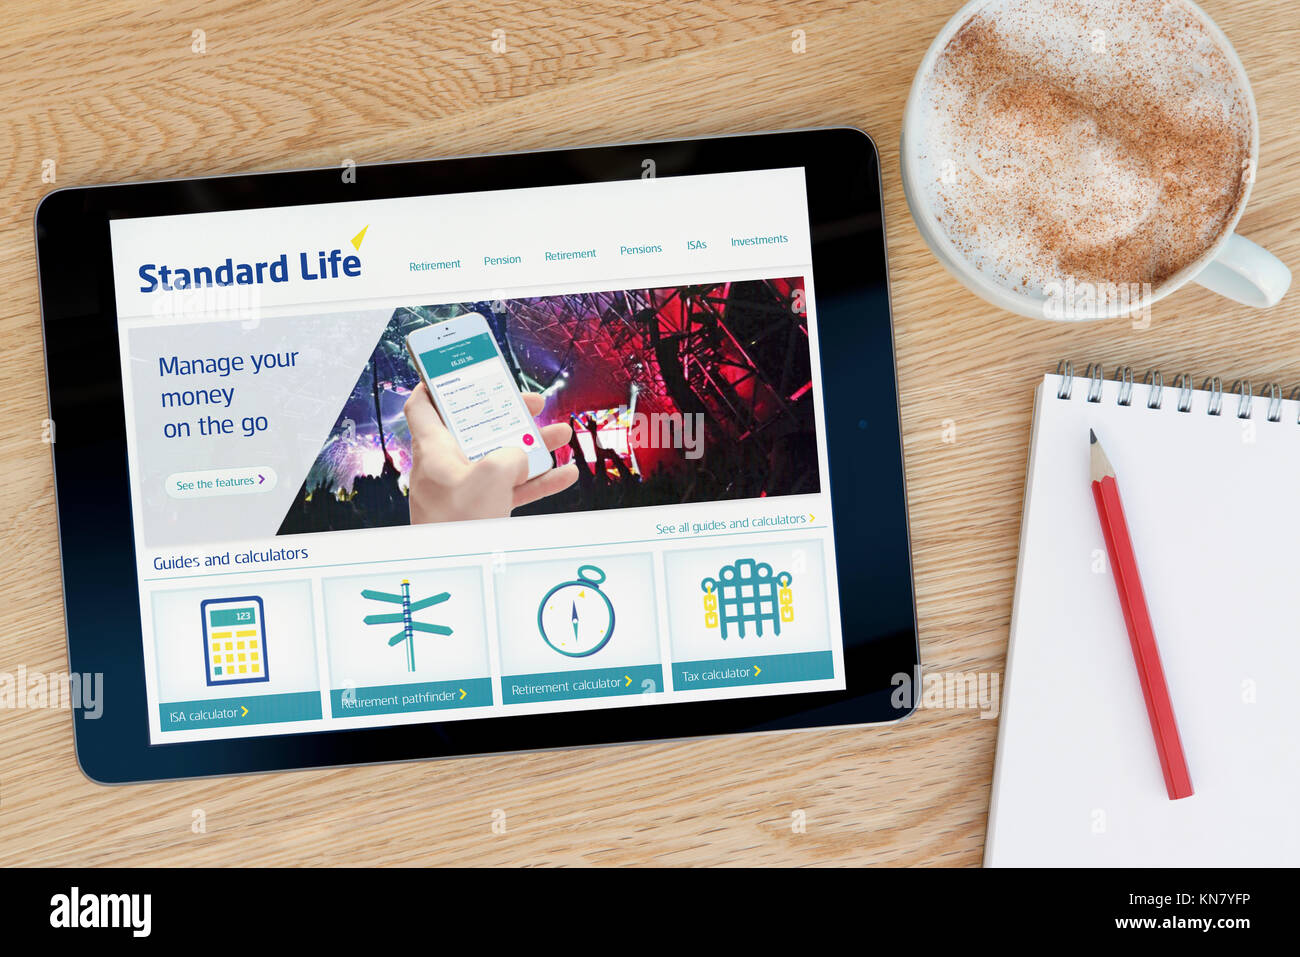 The Standard Life website on an iPad tablet device which rests on a wooden table beside a notepad and pencil and a cup of coffee (Editorial only) Stock Photo